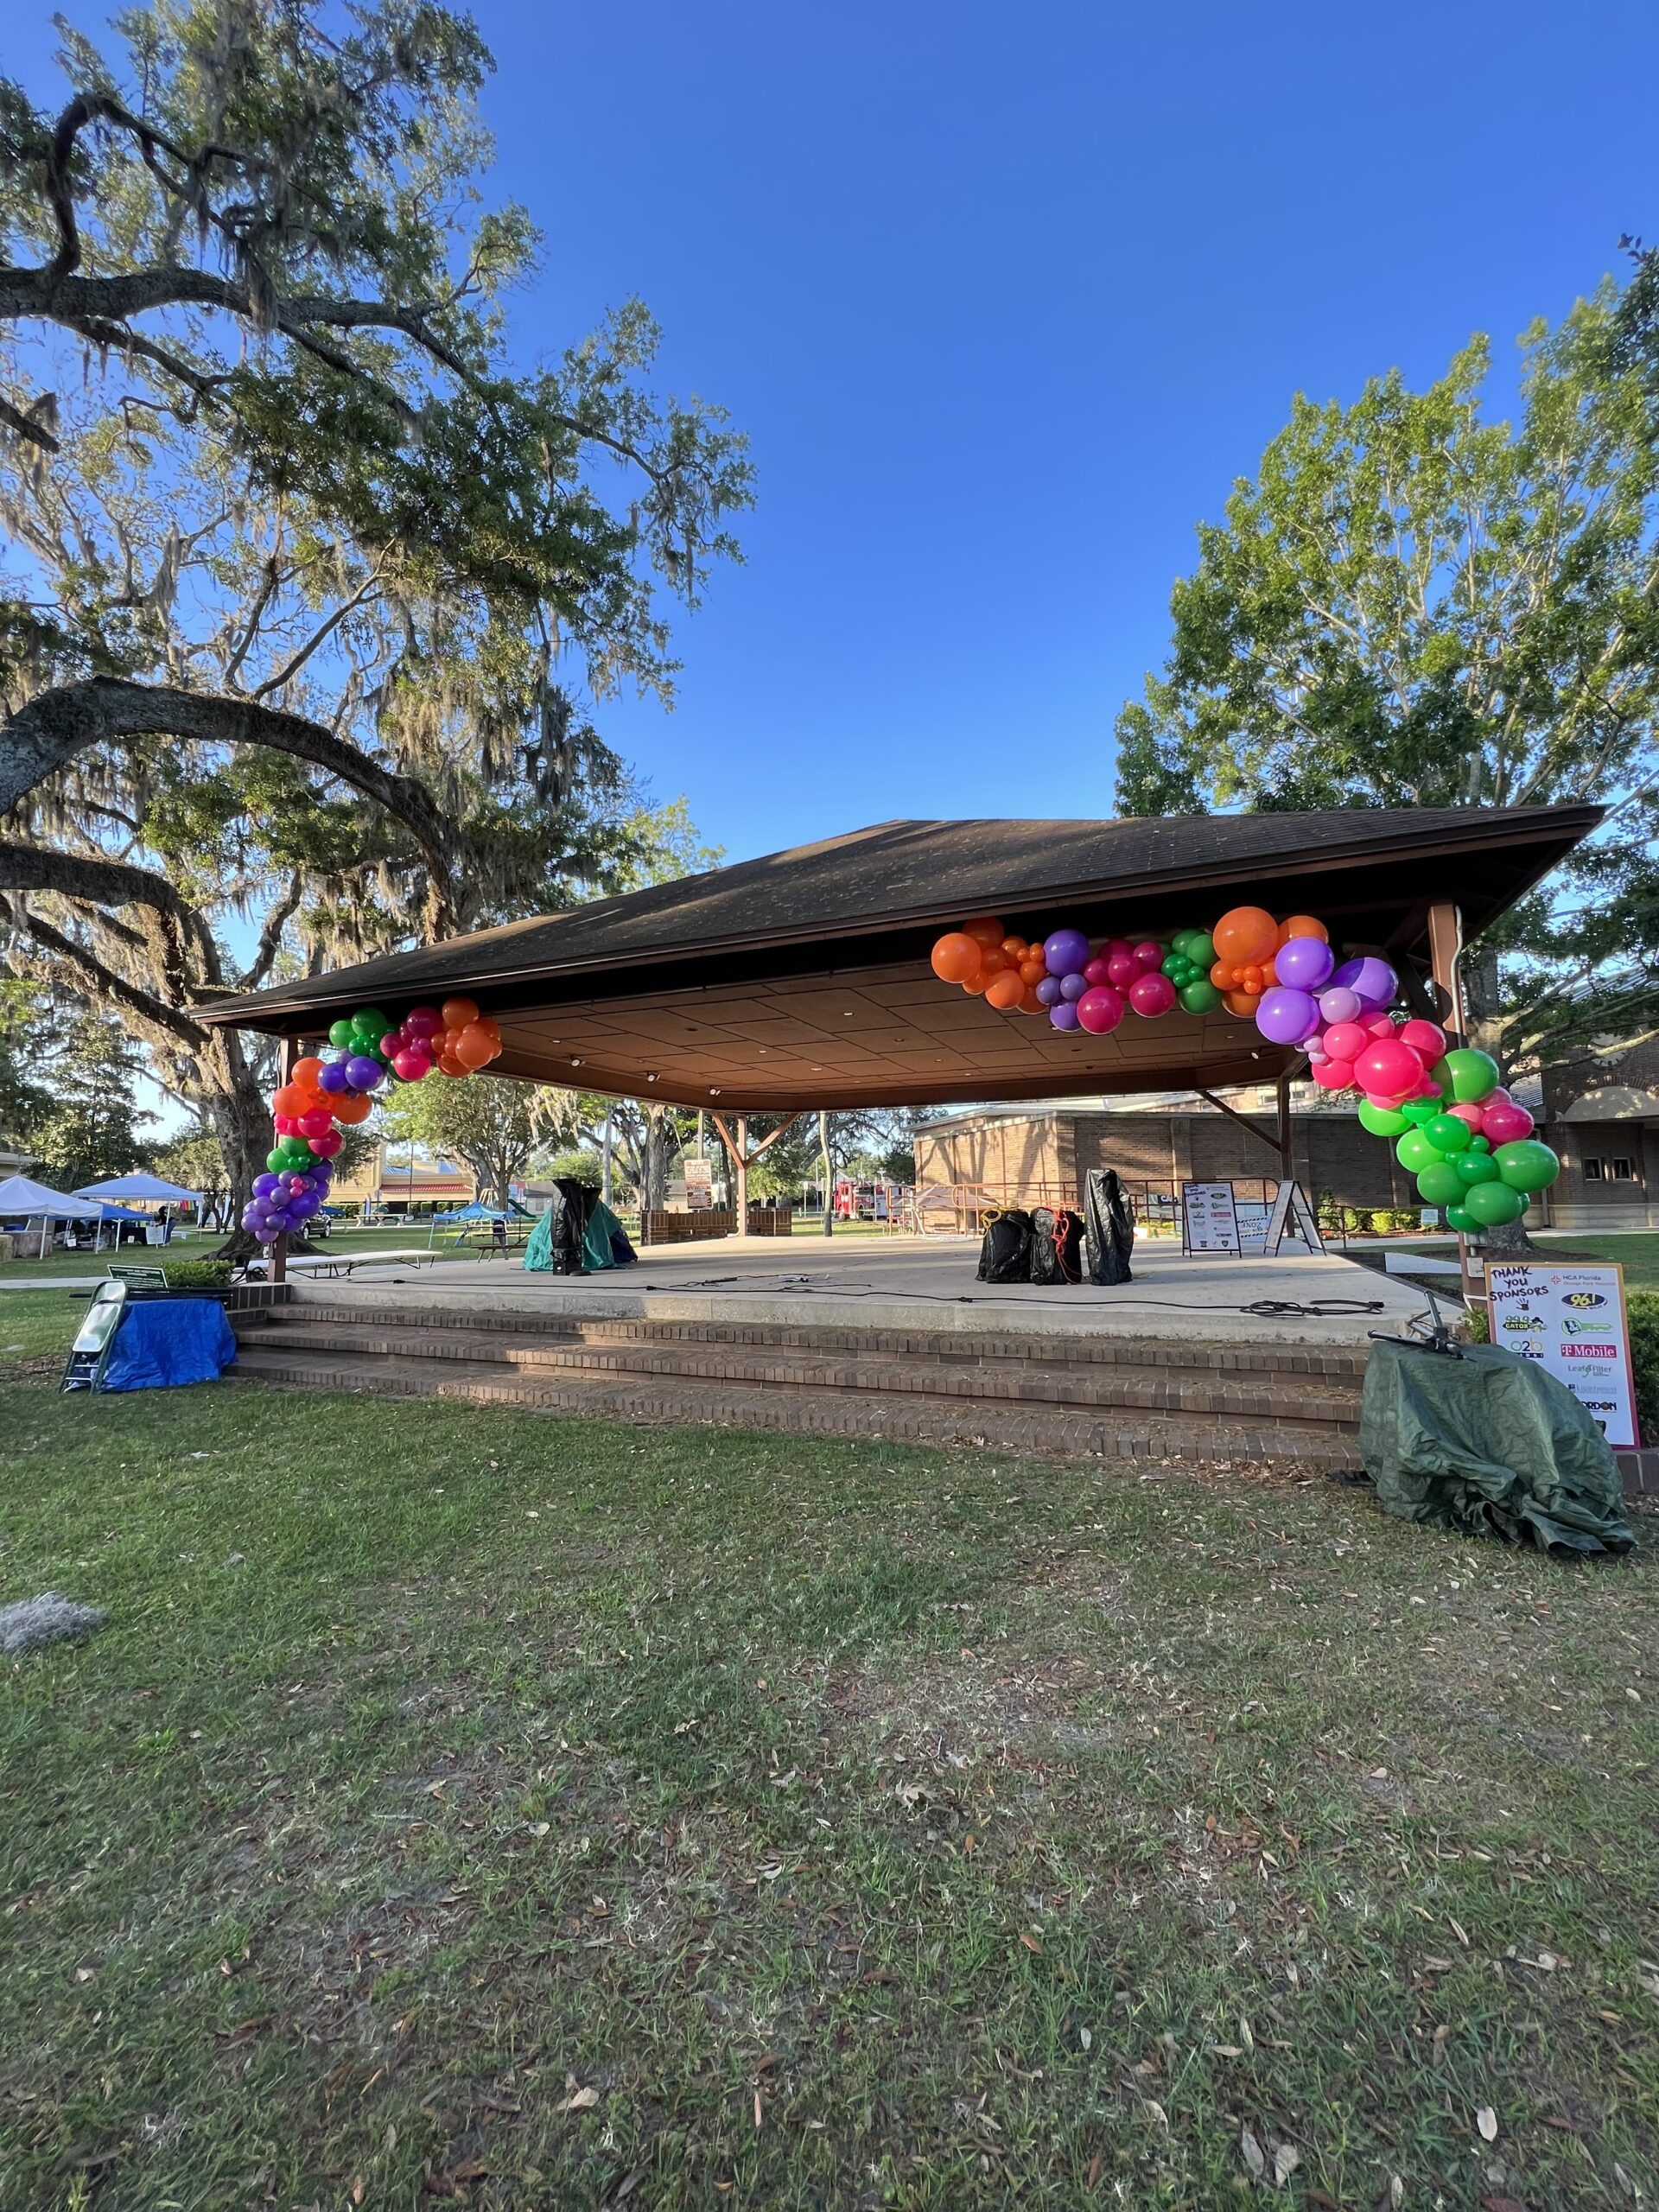 Large colorful balloon garland attached to a public park stage in orange park